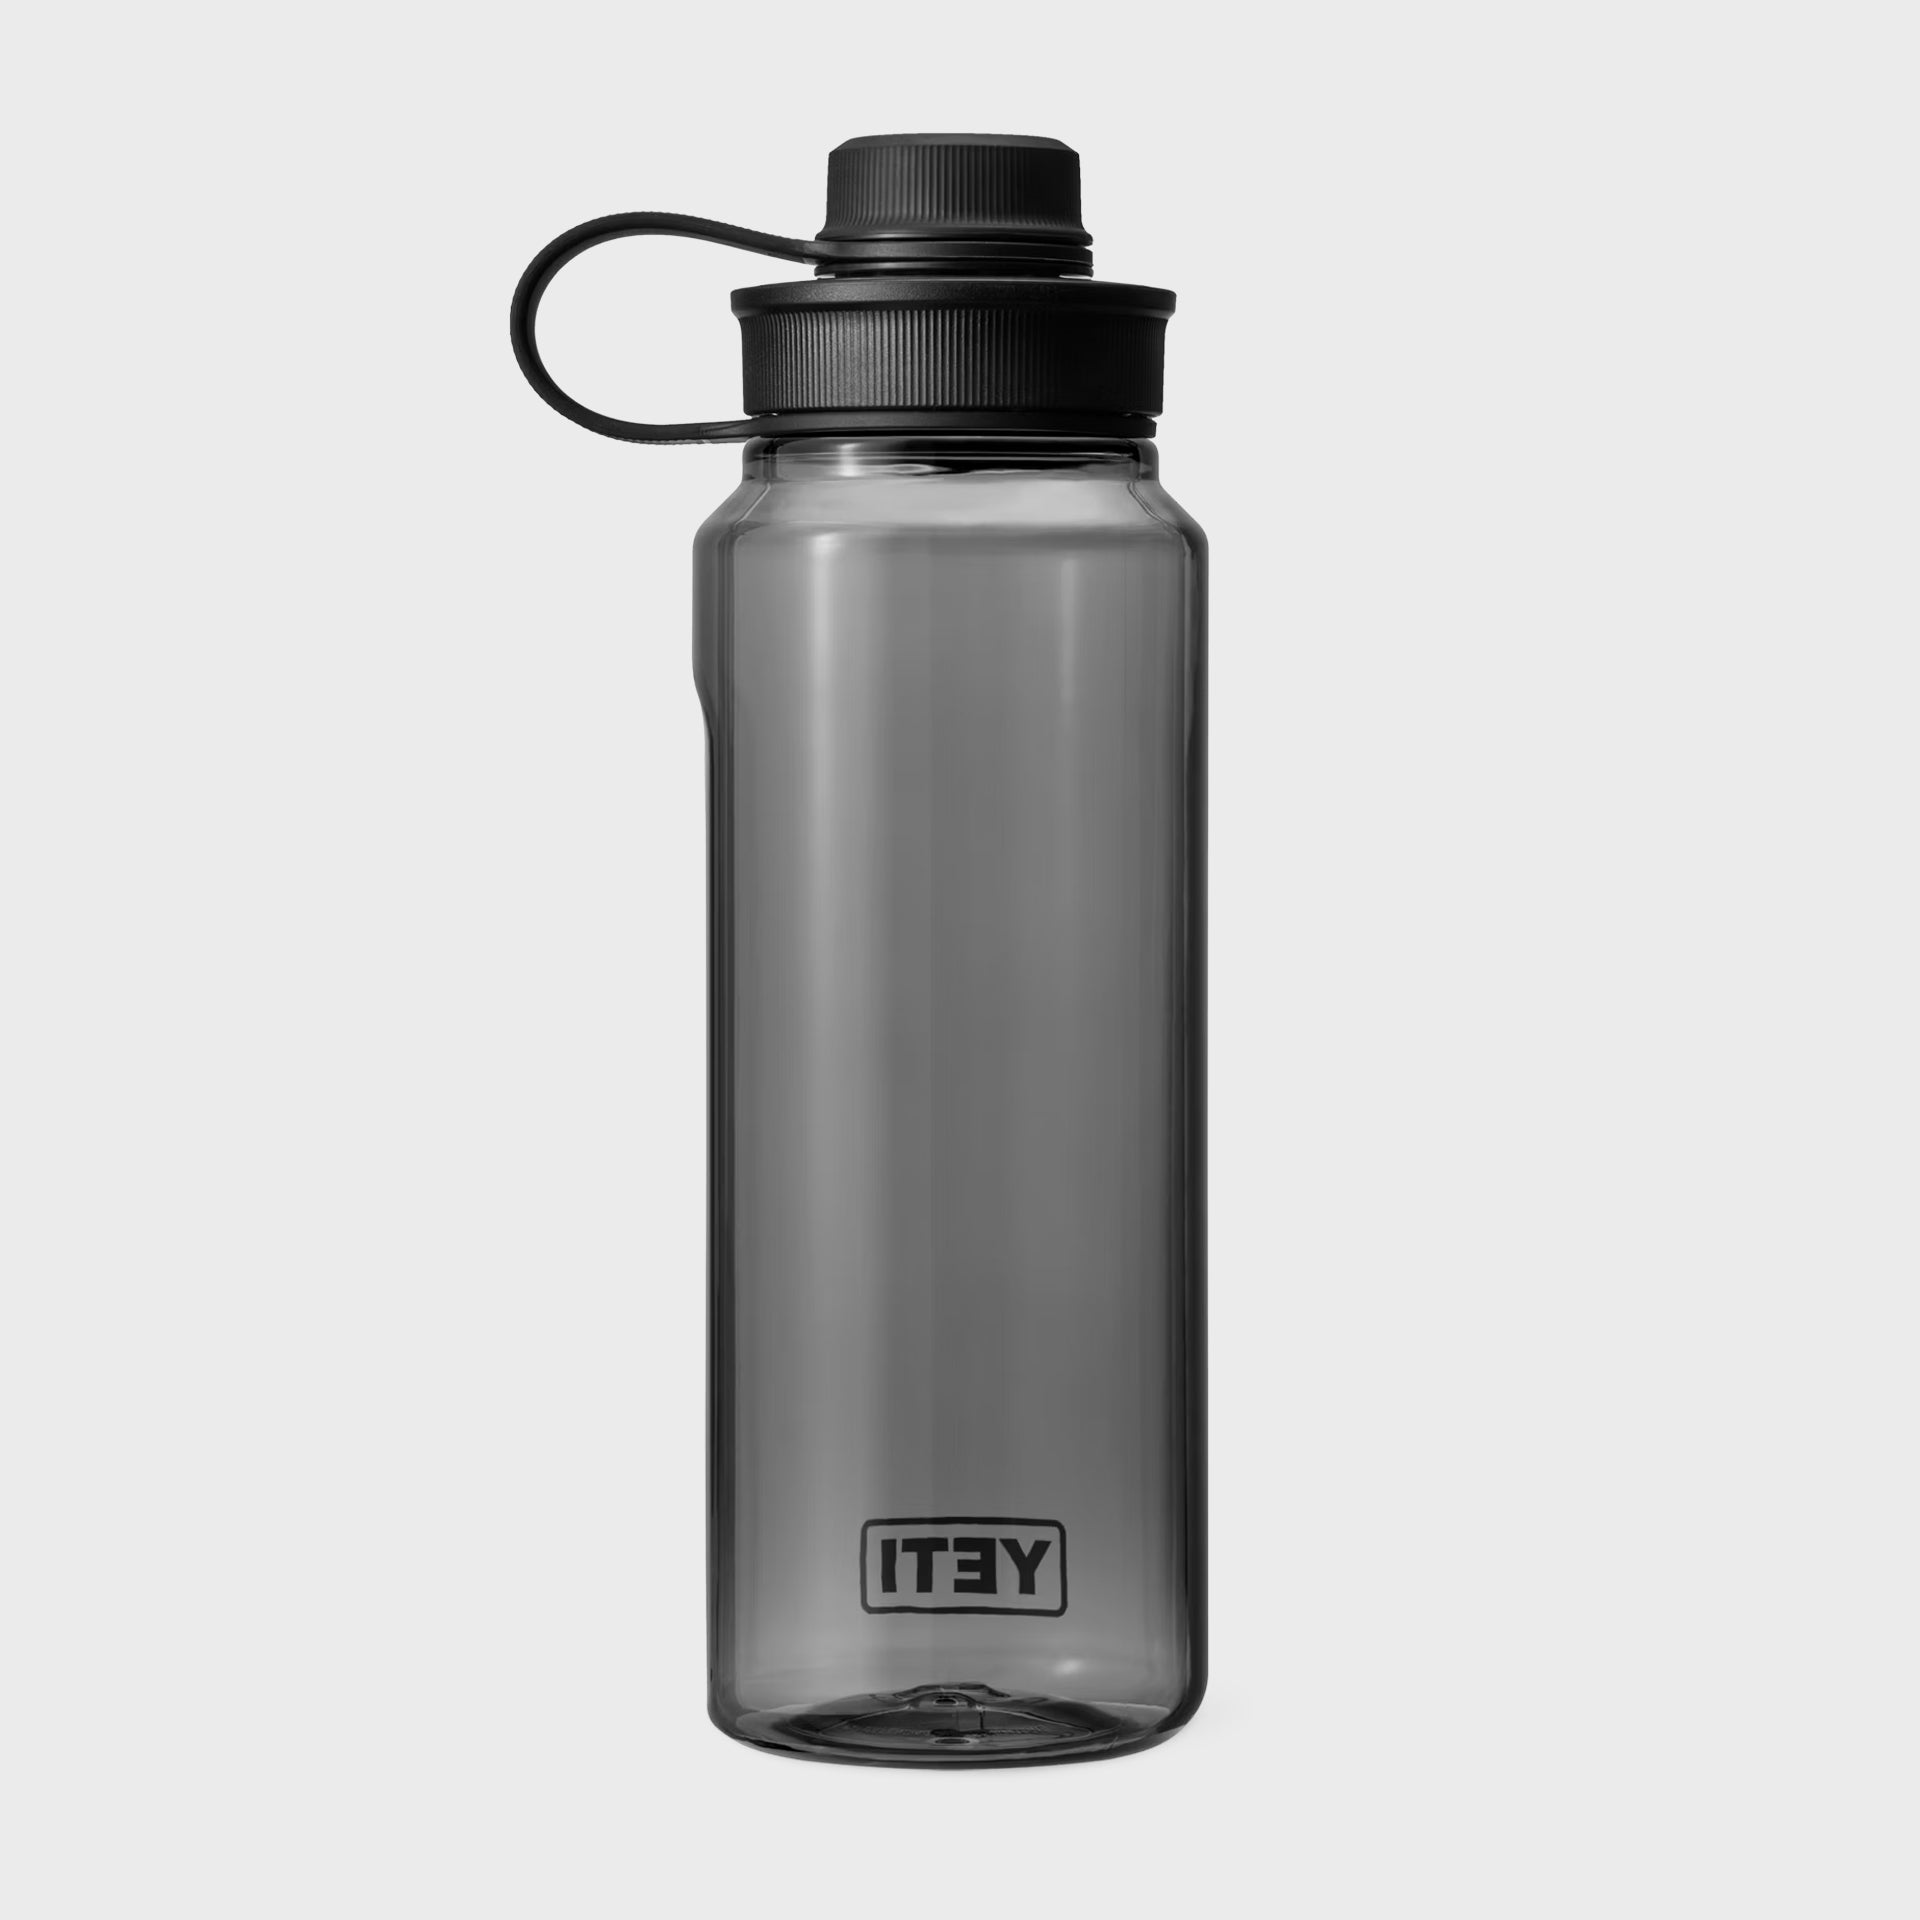 YETI Expands Rugged Yonder Water Bottle Line - Man Makes Fire